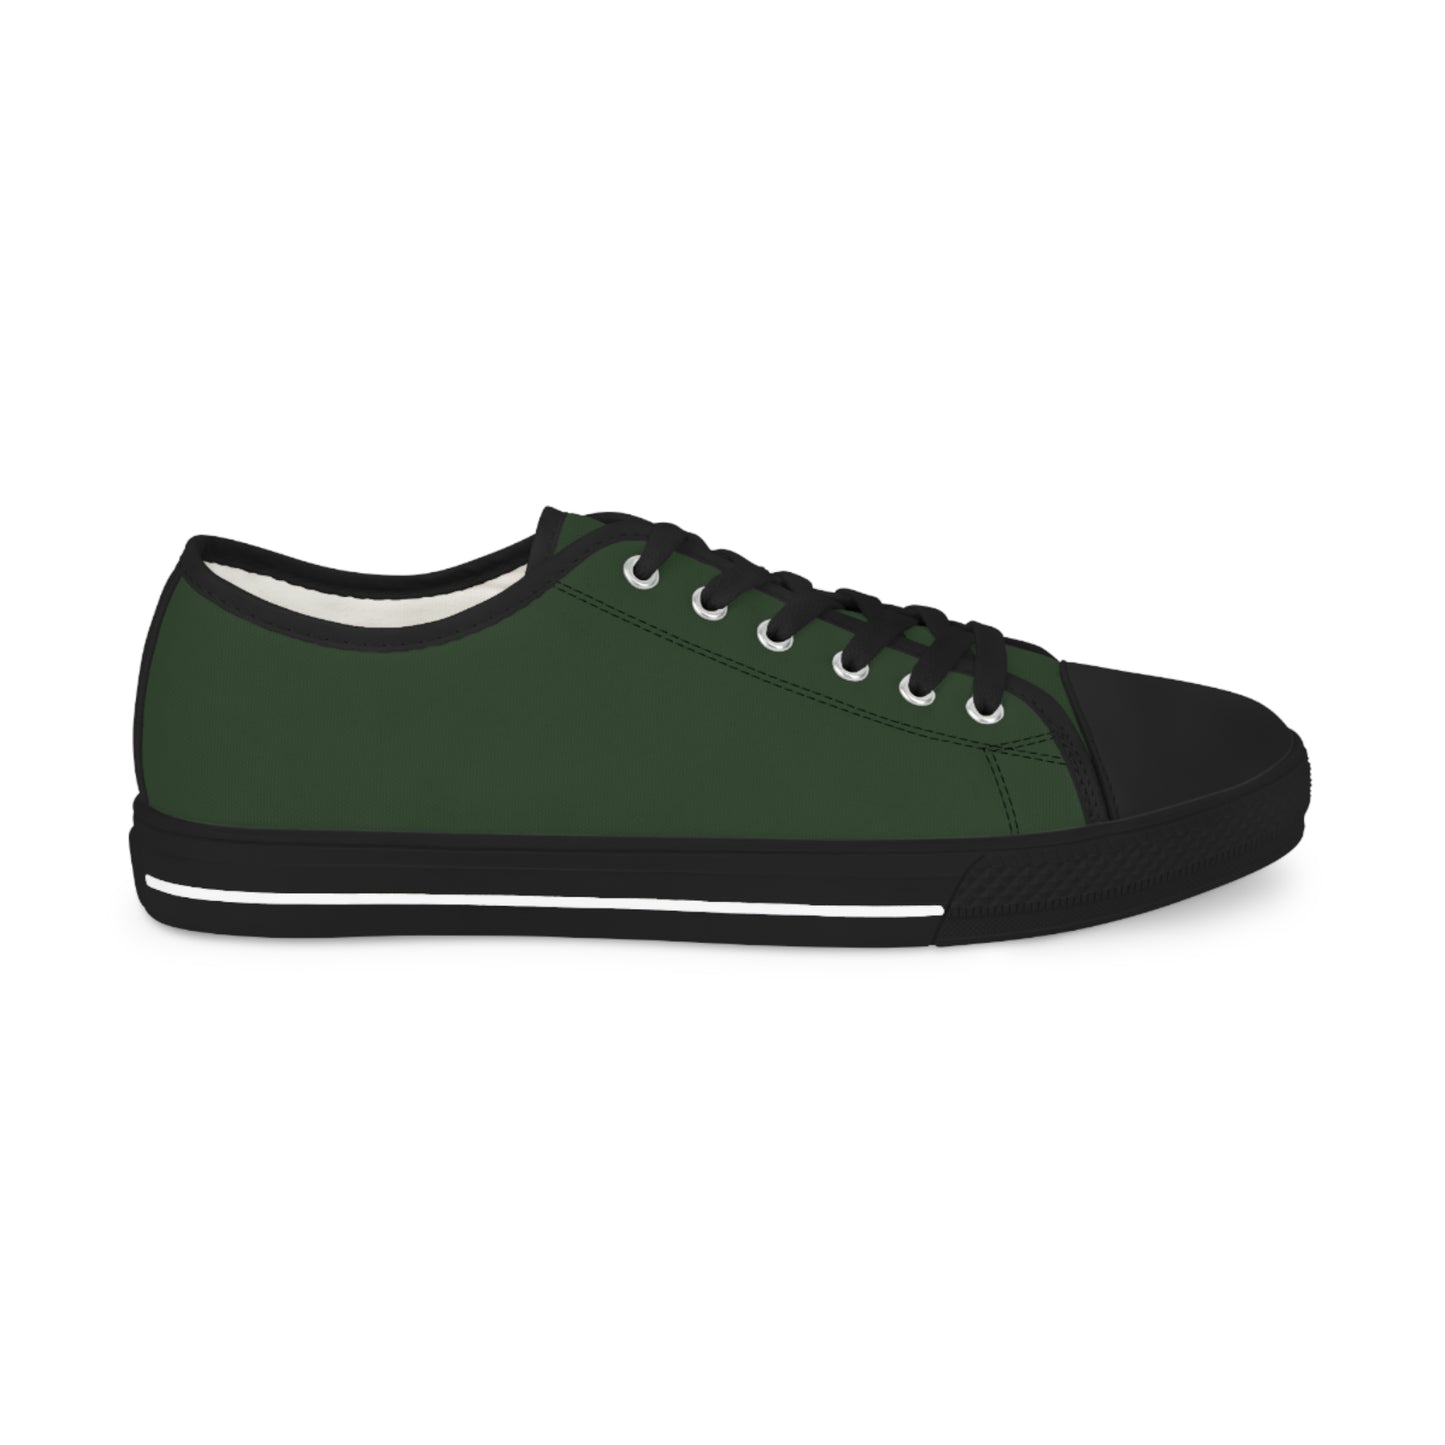 Men's Canvas Low Top Solid Color Sneakers - Hunter Green US 14 Black sole